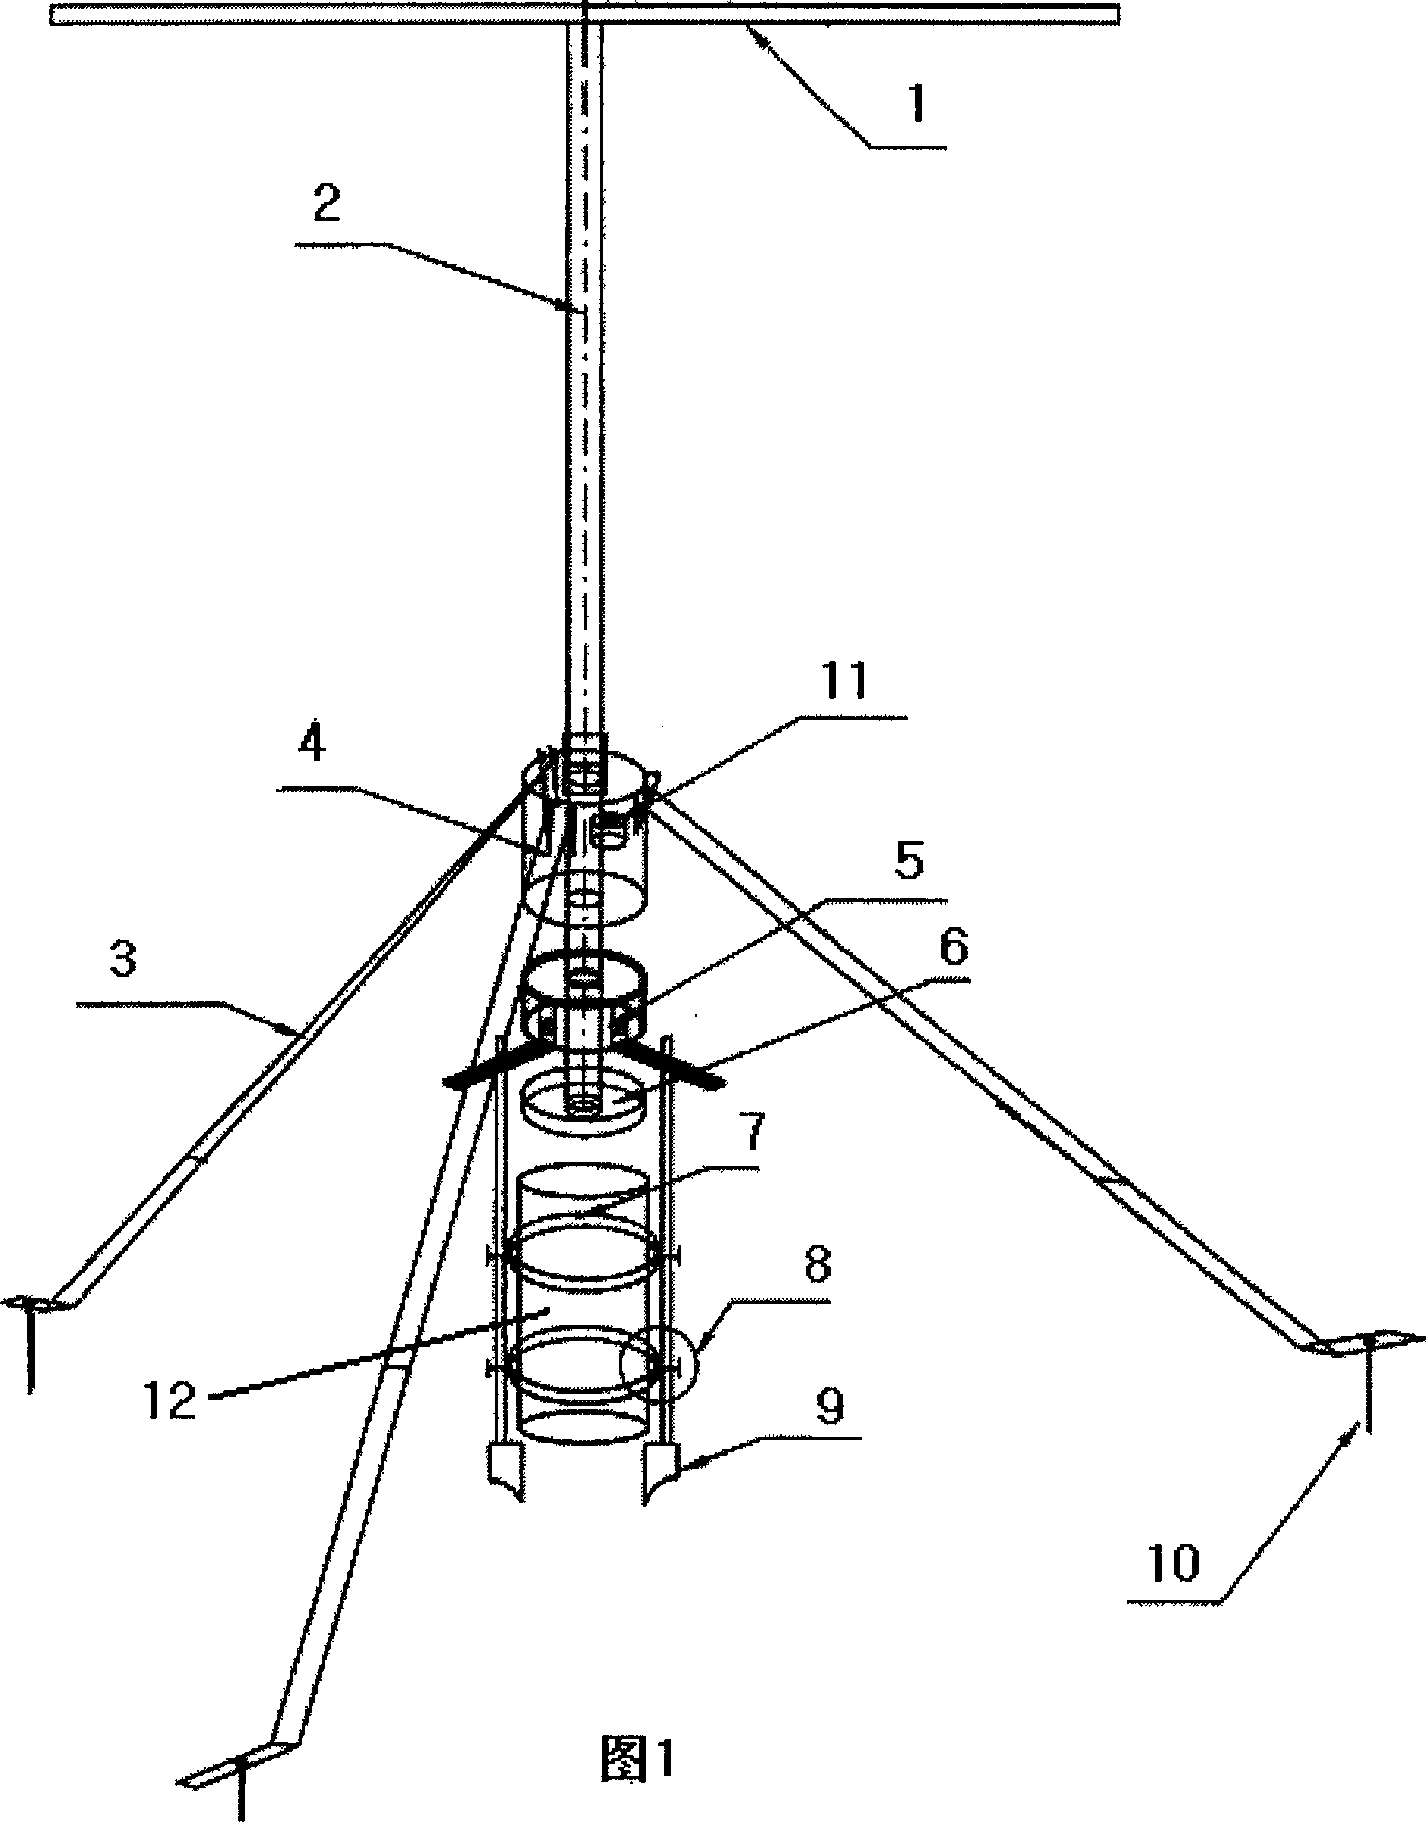 Support rotating undisturbed soil sampling device